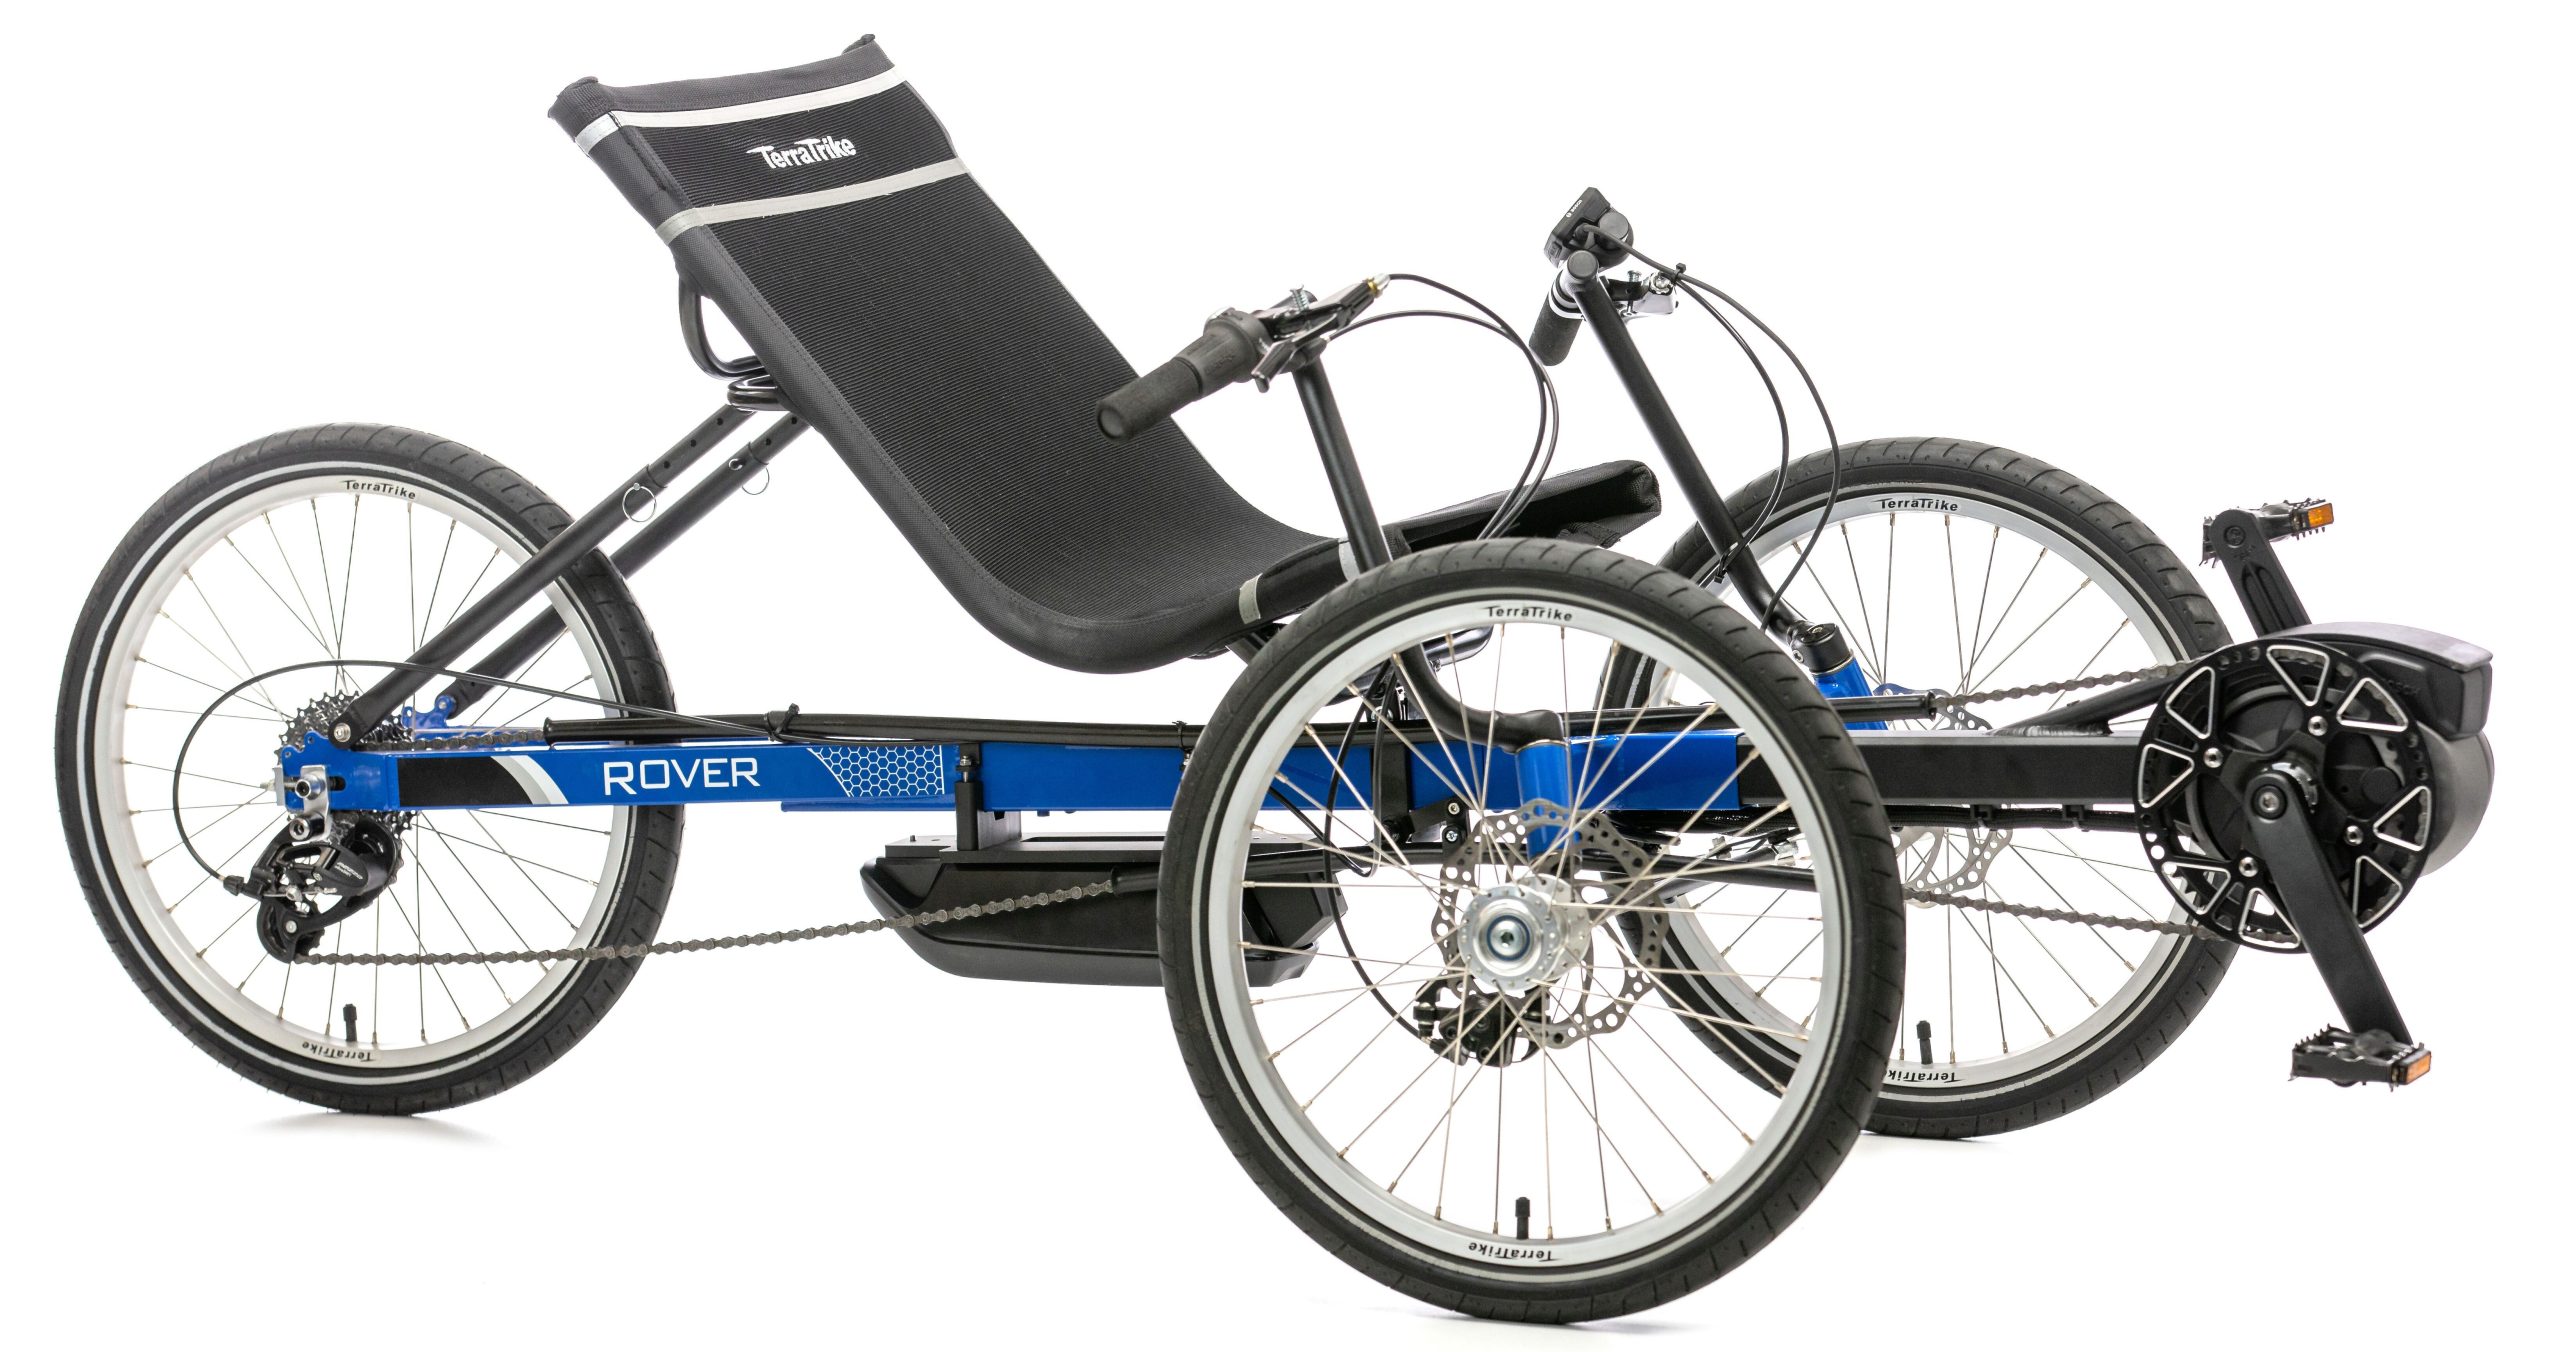 TerraTrike is offering an electric boost kit by Bosch for its recumbent trikes